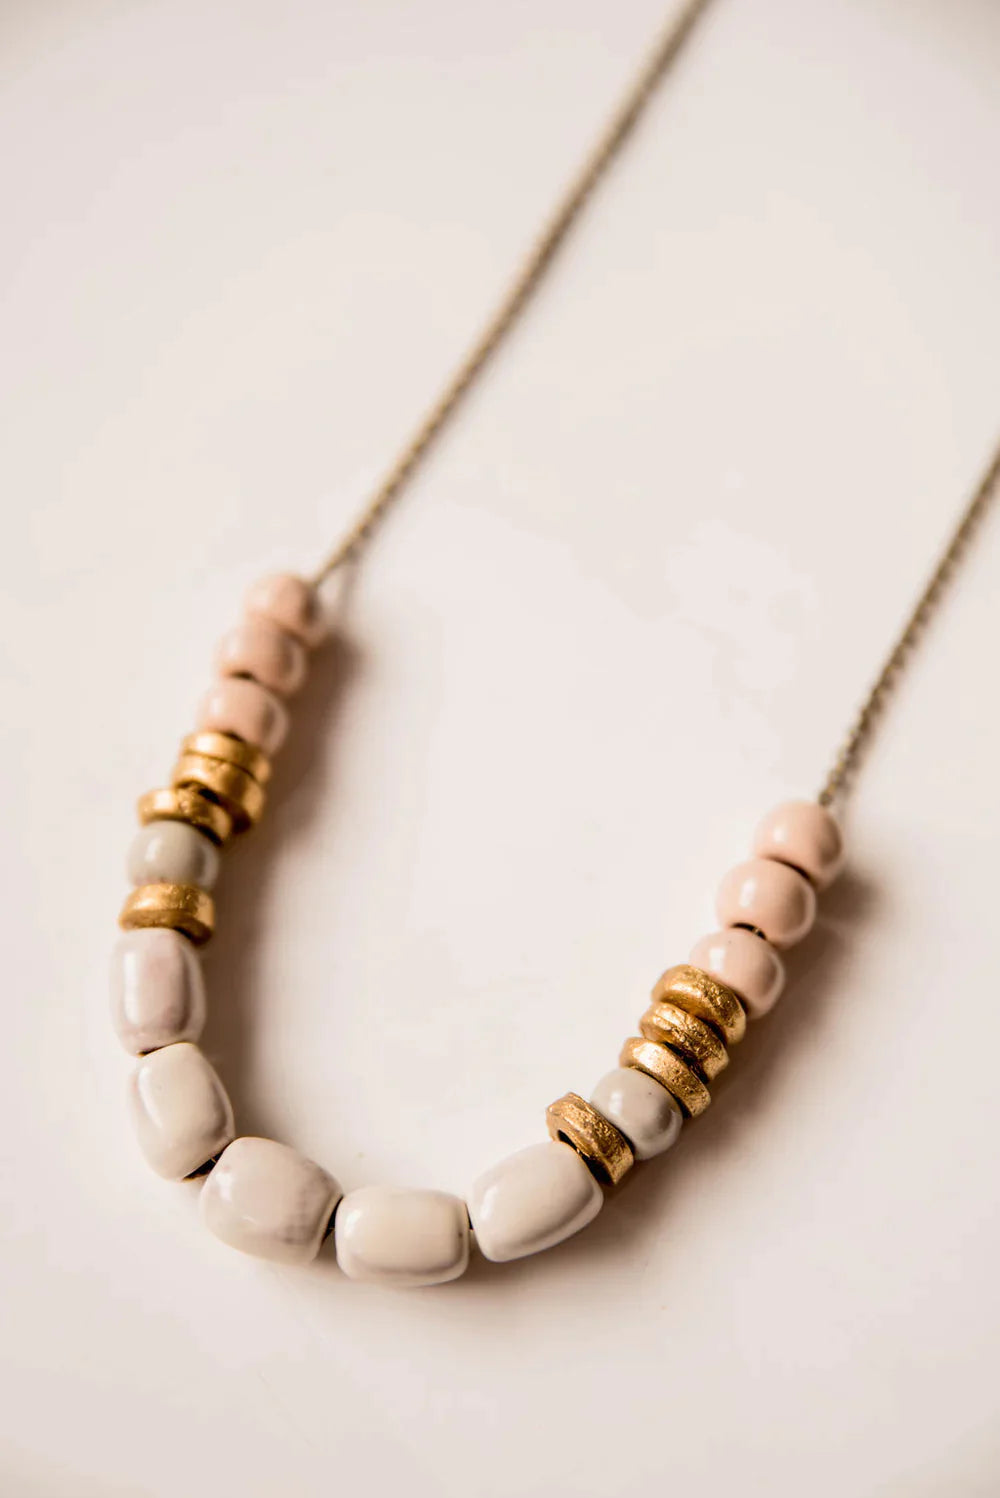 Bel Koz Assorted Beads Clay Necklace - IVORY - Link in description to purchase at Betsey's